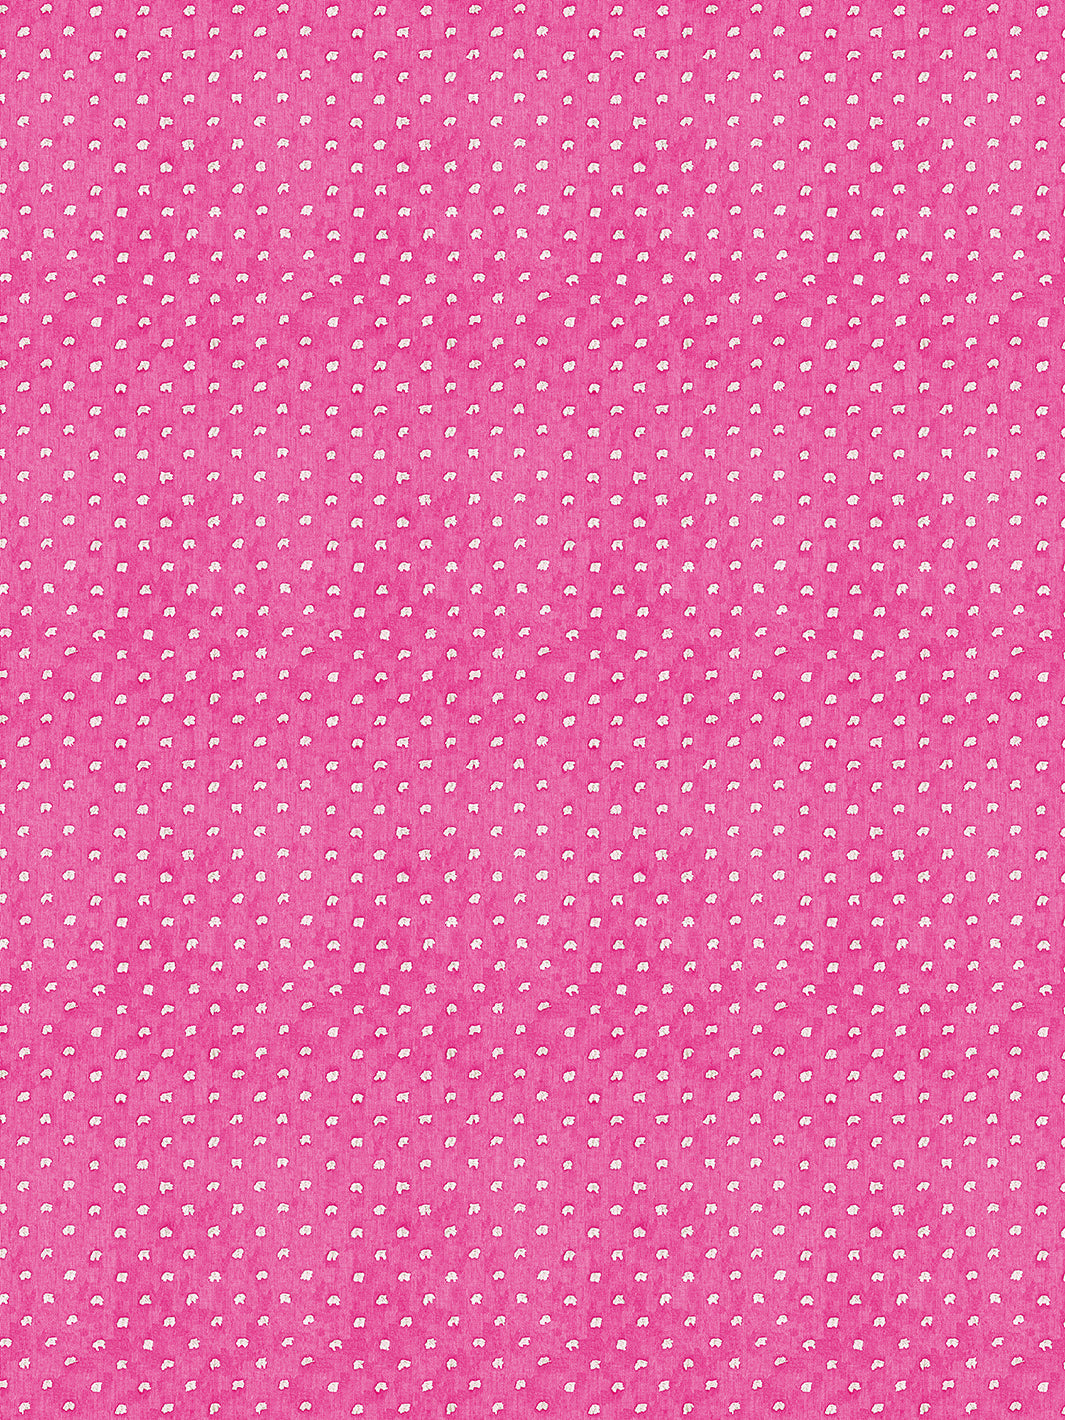 'Dotted Swiss' Wallpaper by Sarah Jessica Parker - Raspberry